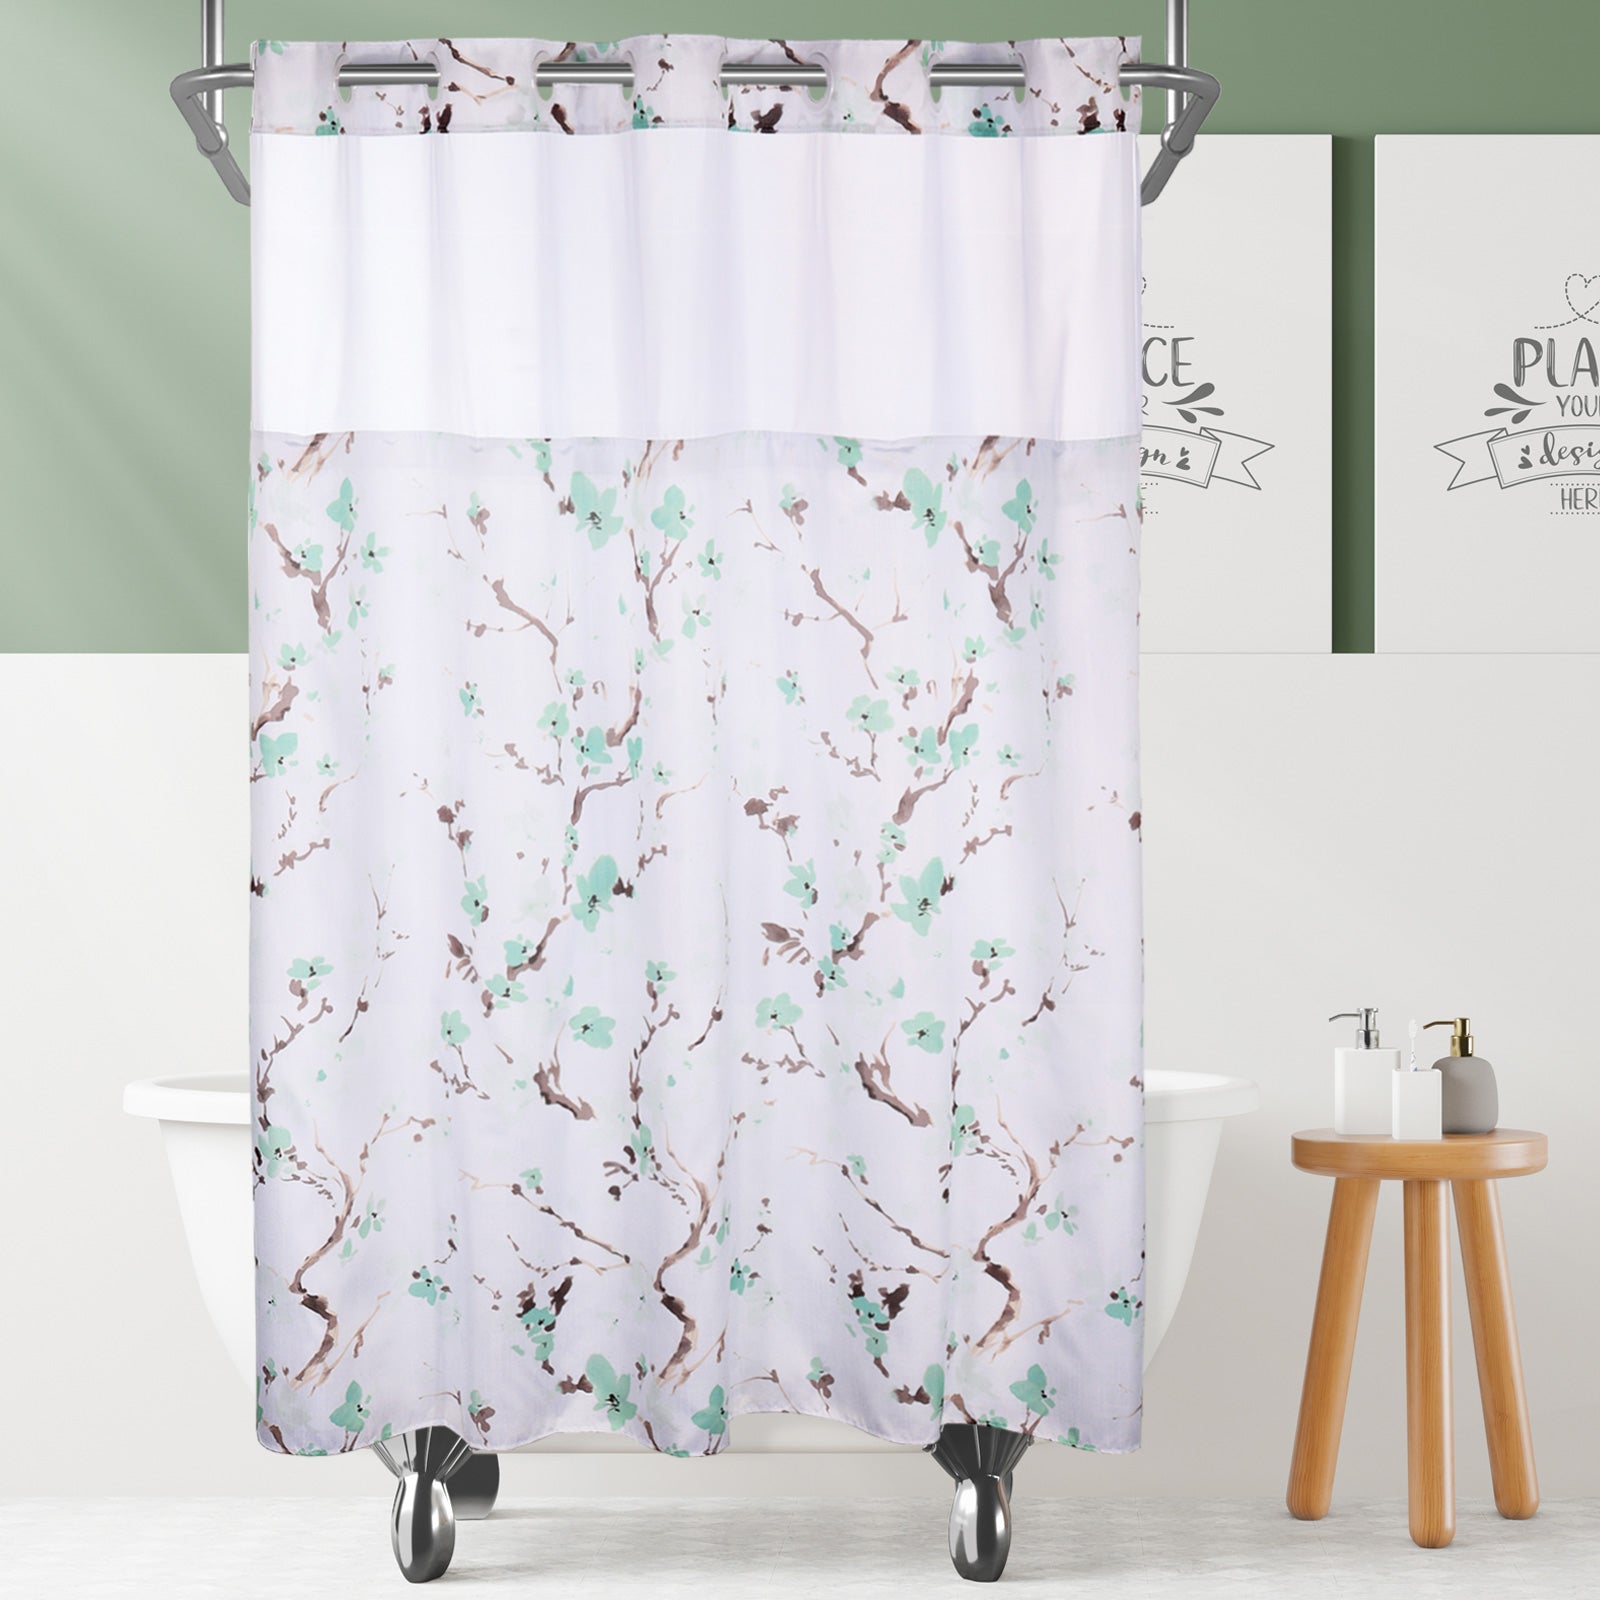 Lagute SnapHook Hook Free Shower Curtain with Snap-in Liner